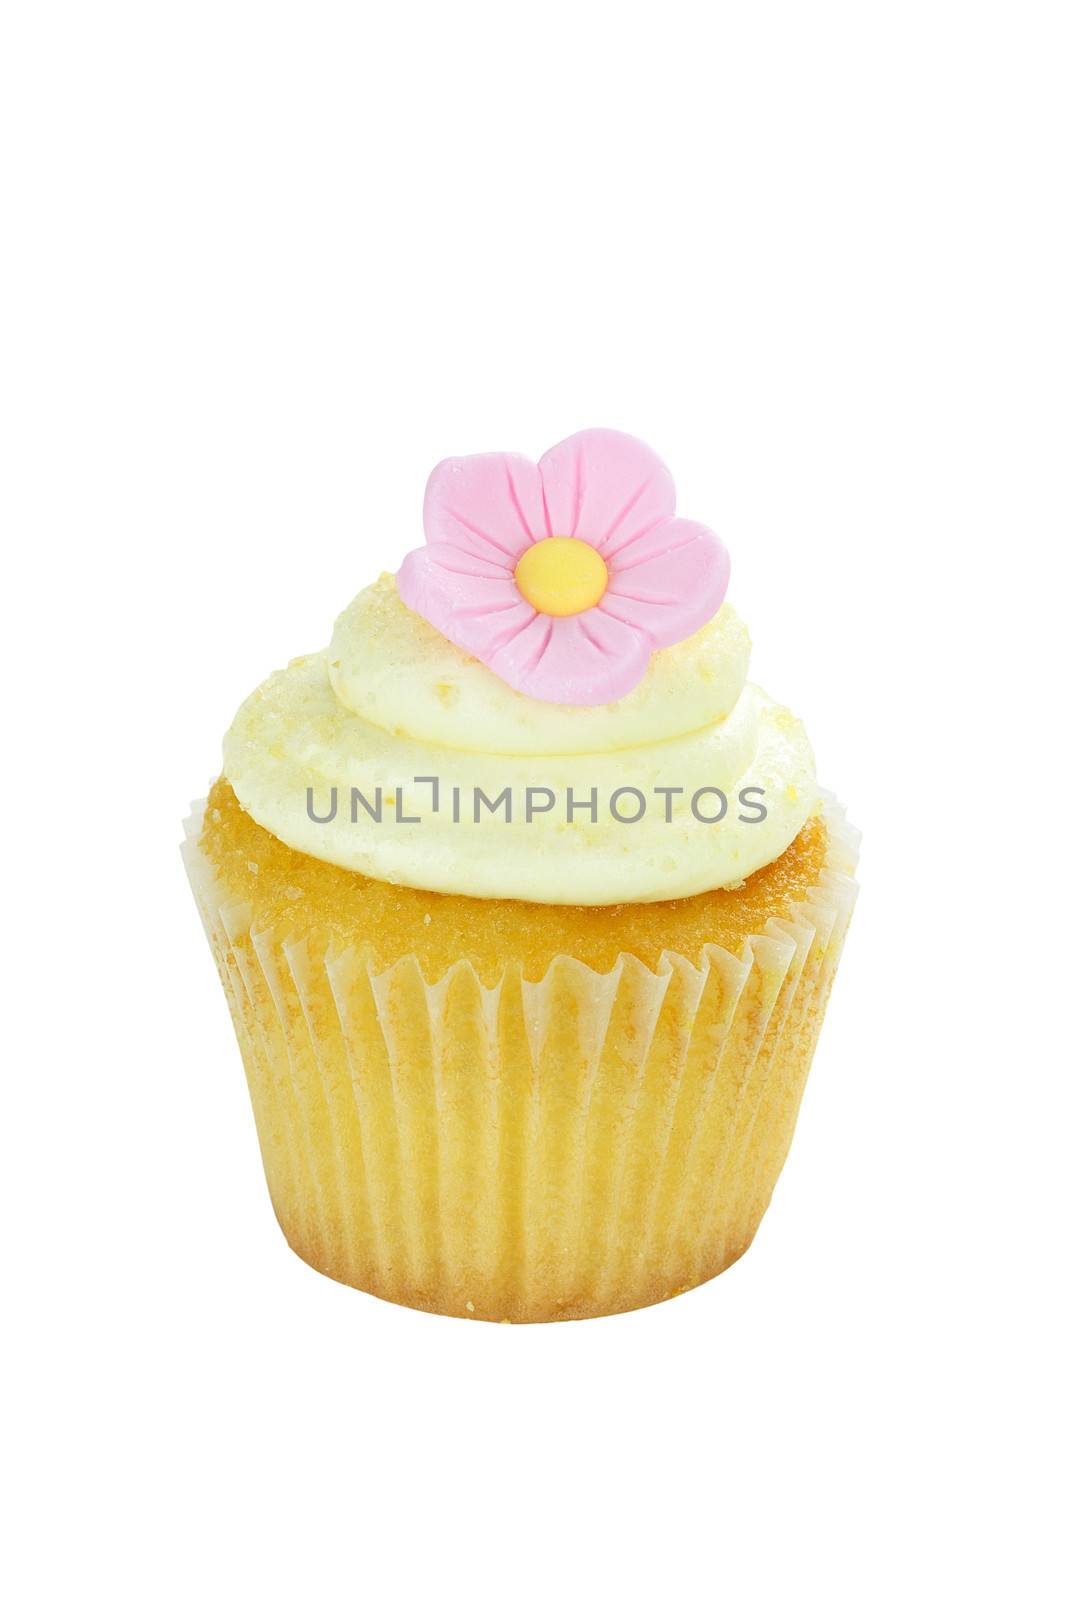 Isolated birthday cupcake with sing;e pink flower. Clipping path included.